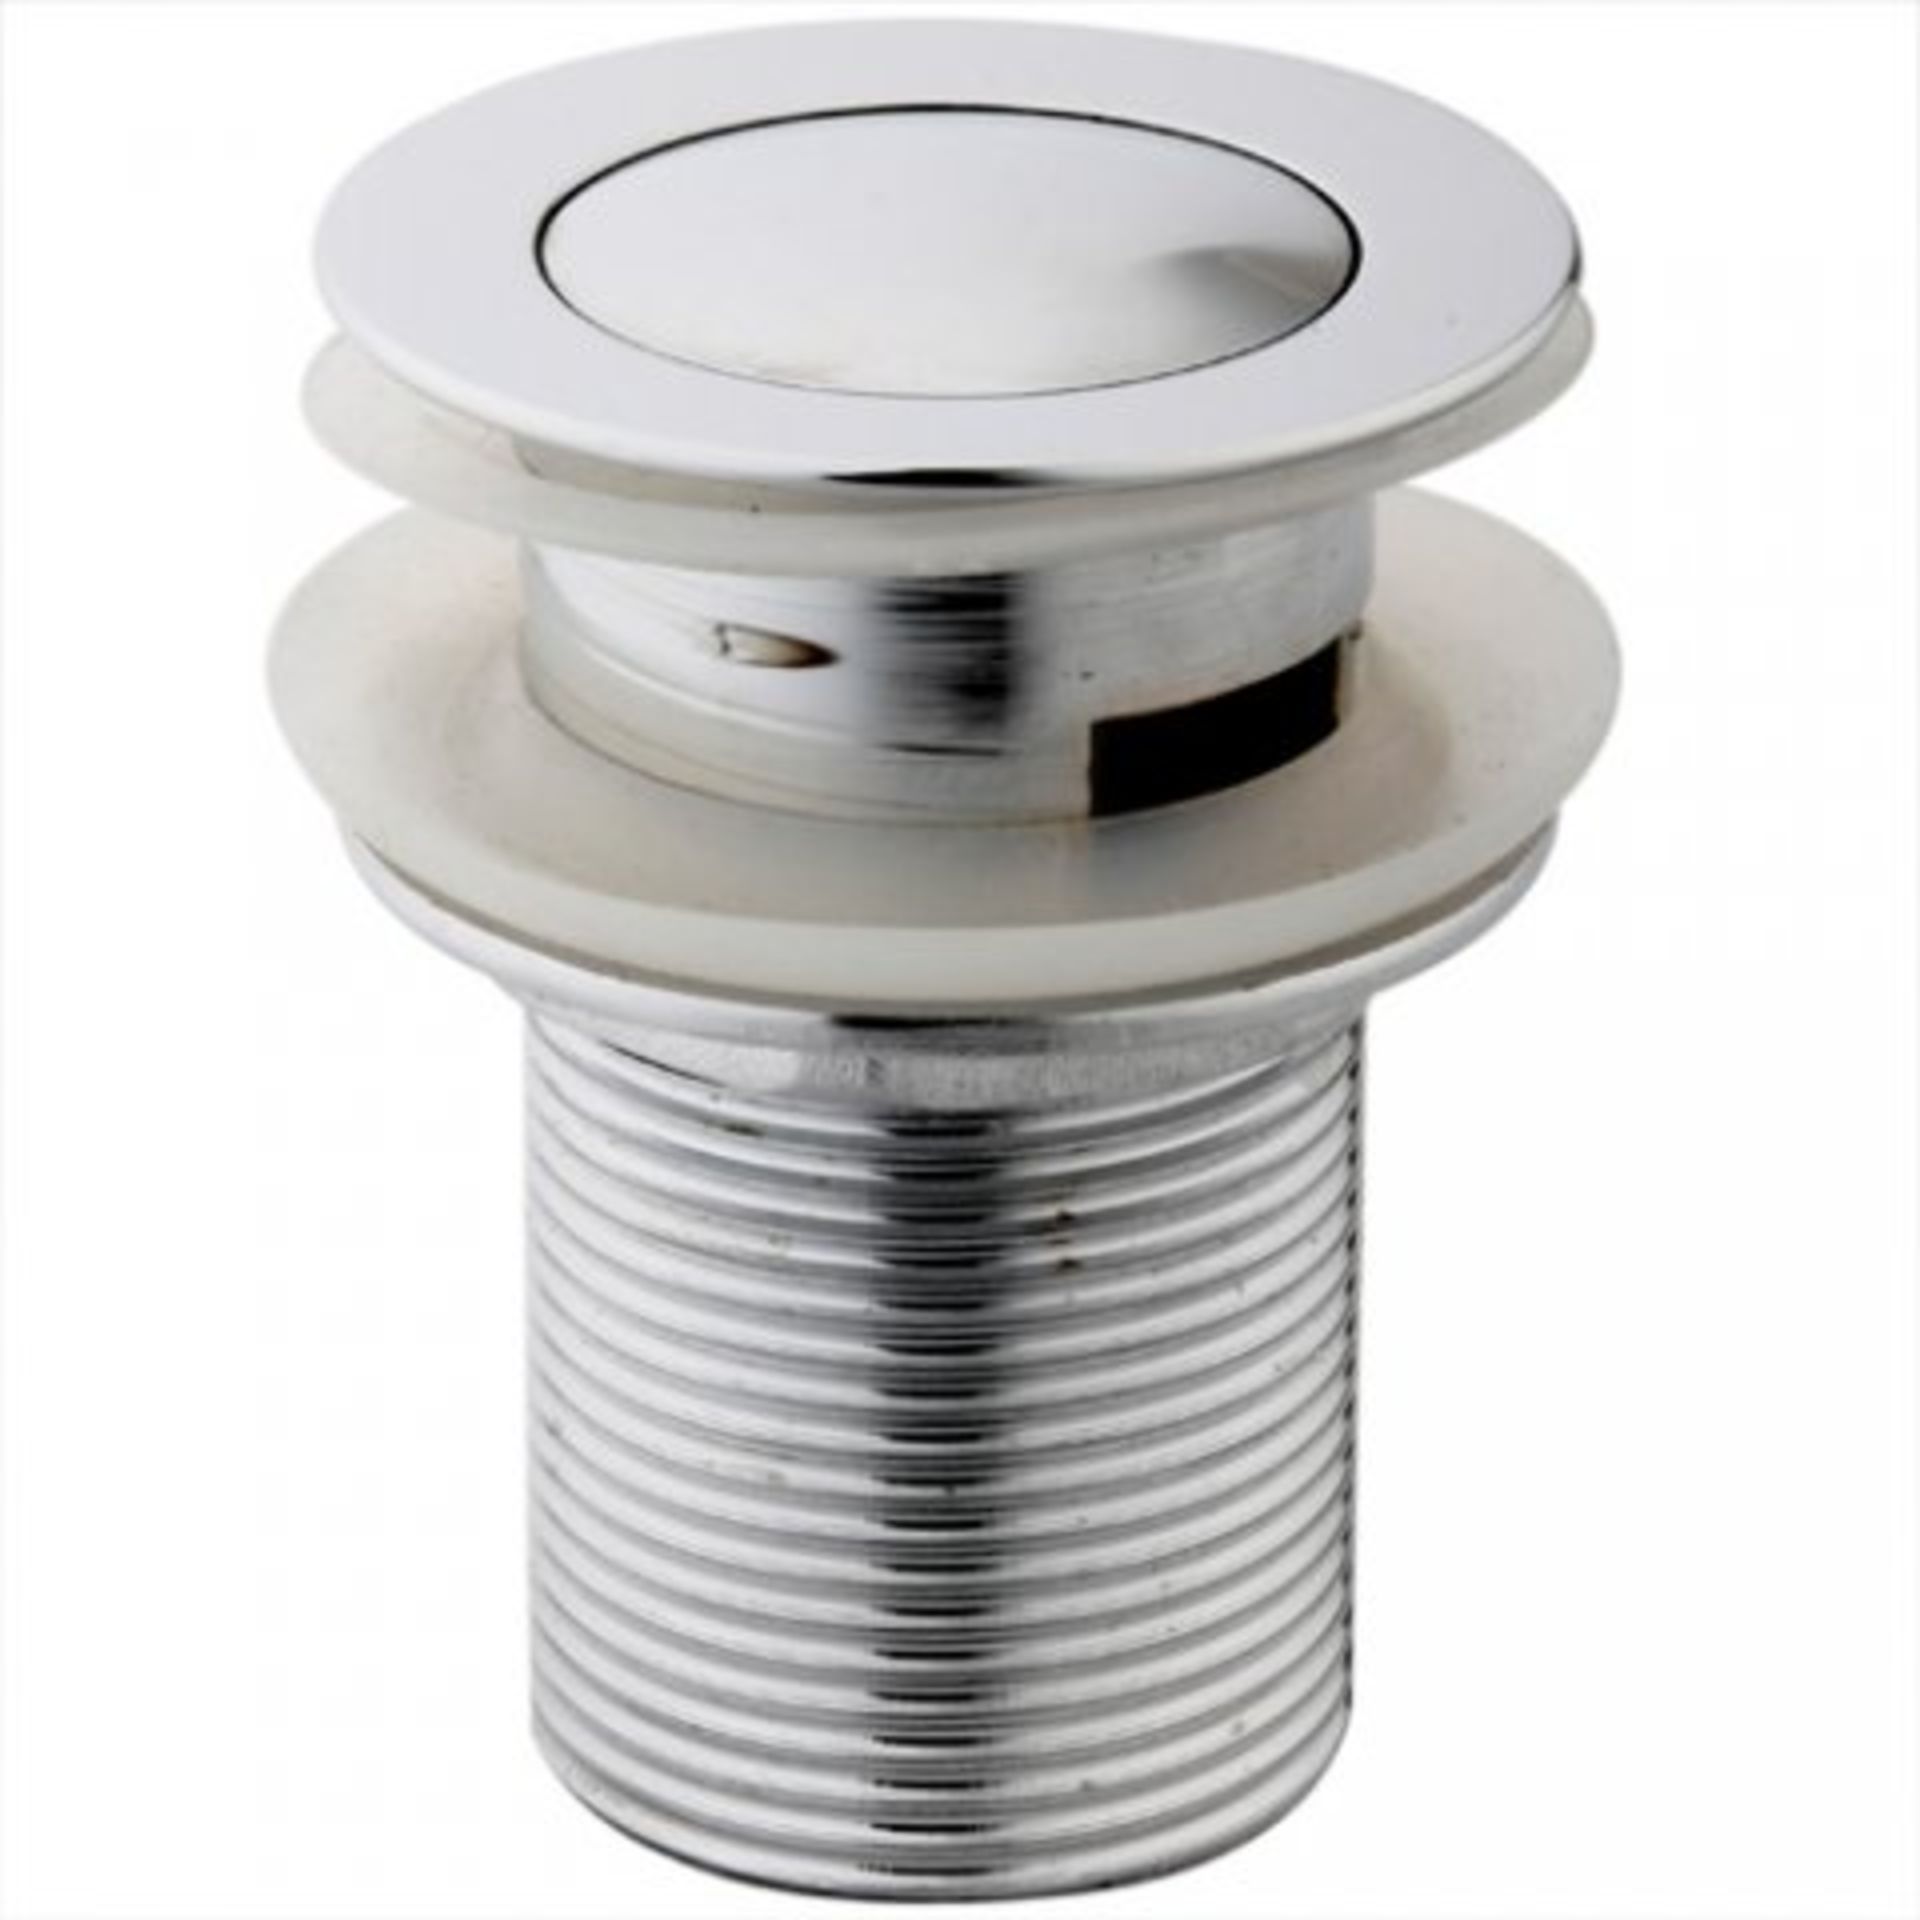 (O319) Basin Waste - Slotted Push Button Pop-Up This slotted push button pop-up basin waste is ideal - Image 2 of 3